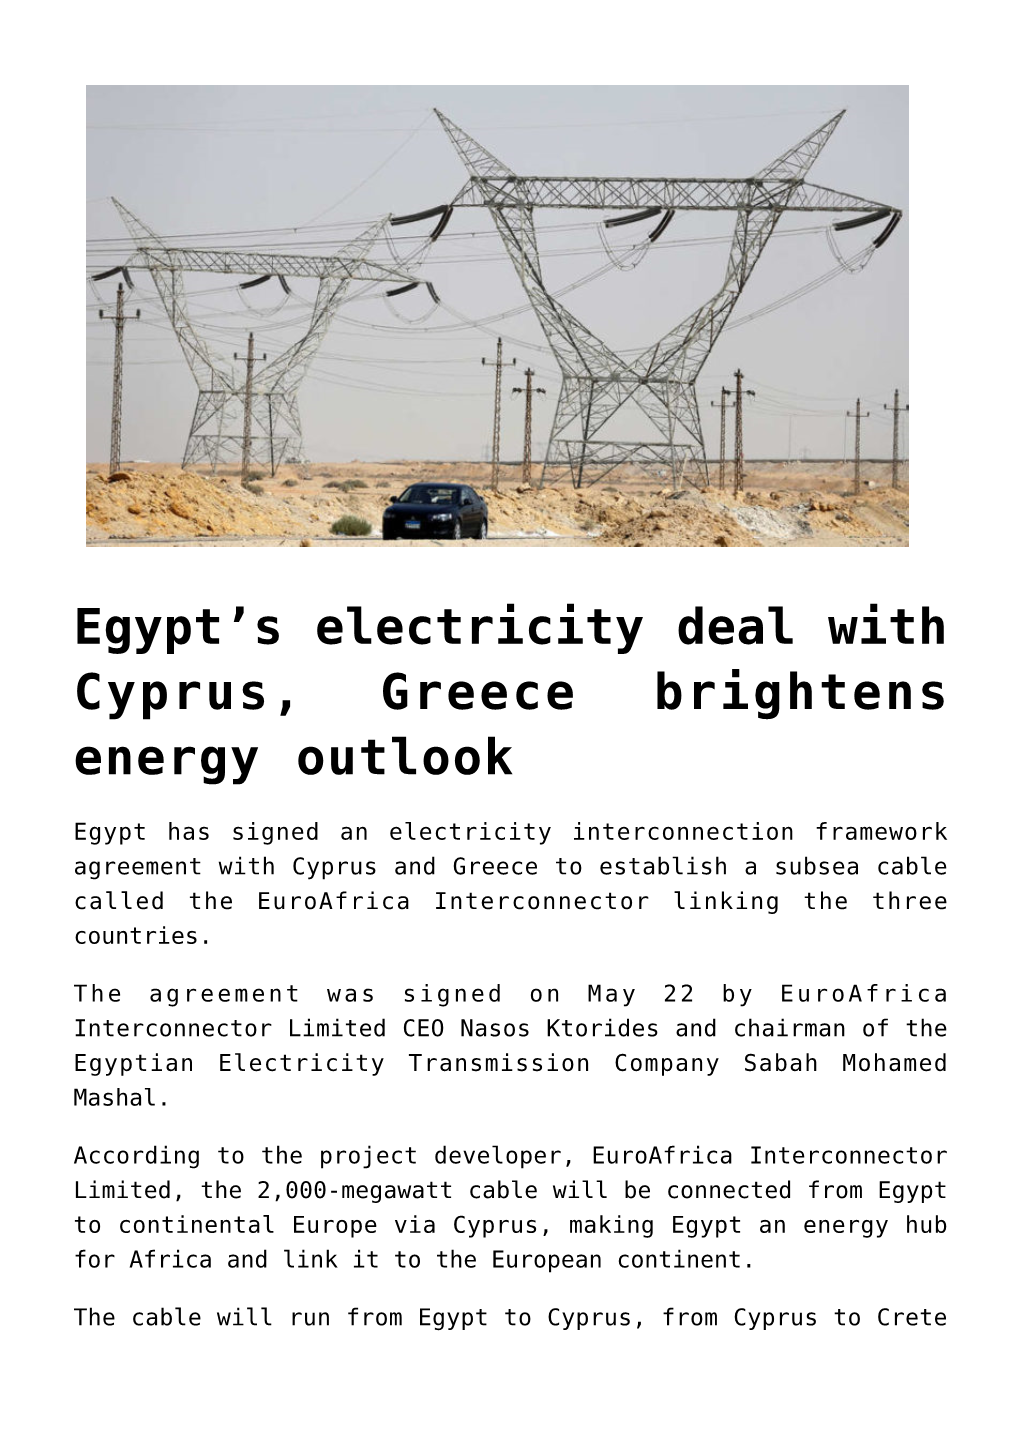 Egypt's Electricity Deal with Cyprus, Greece